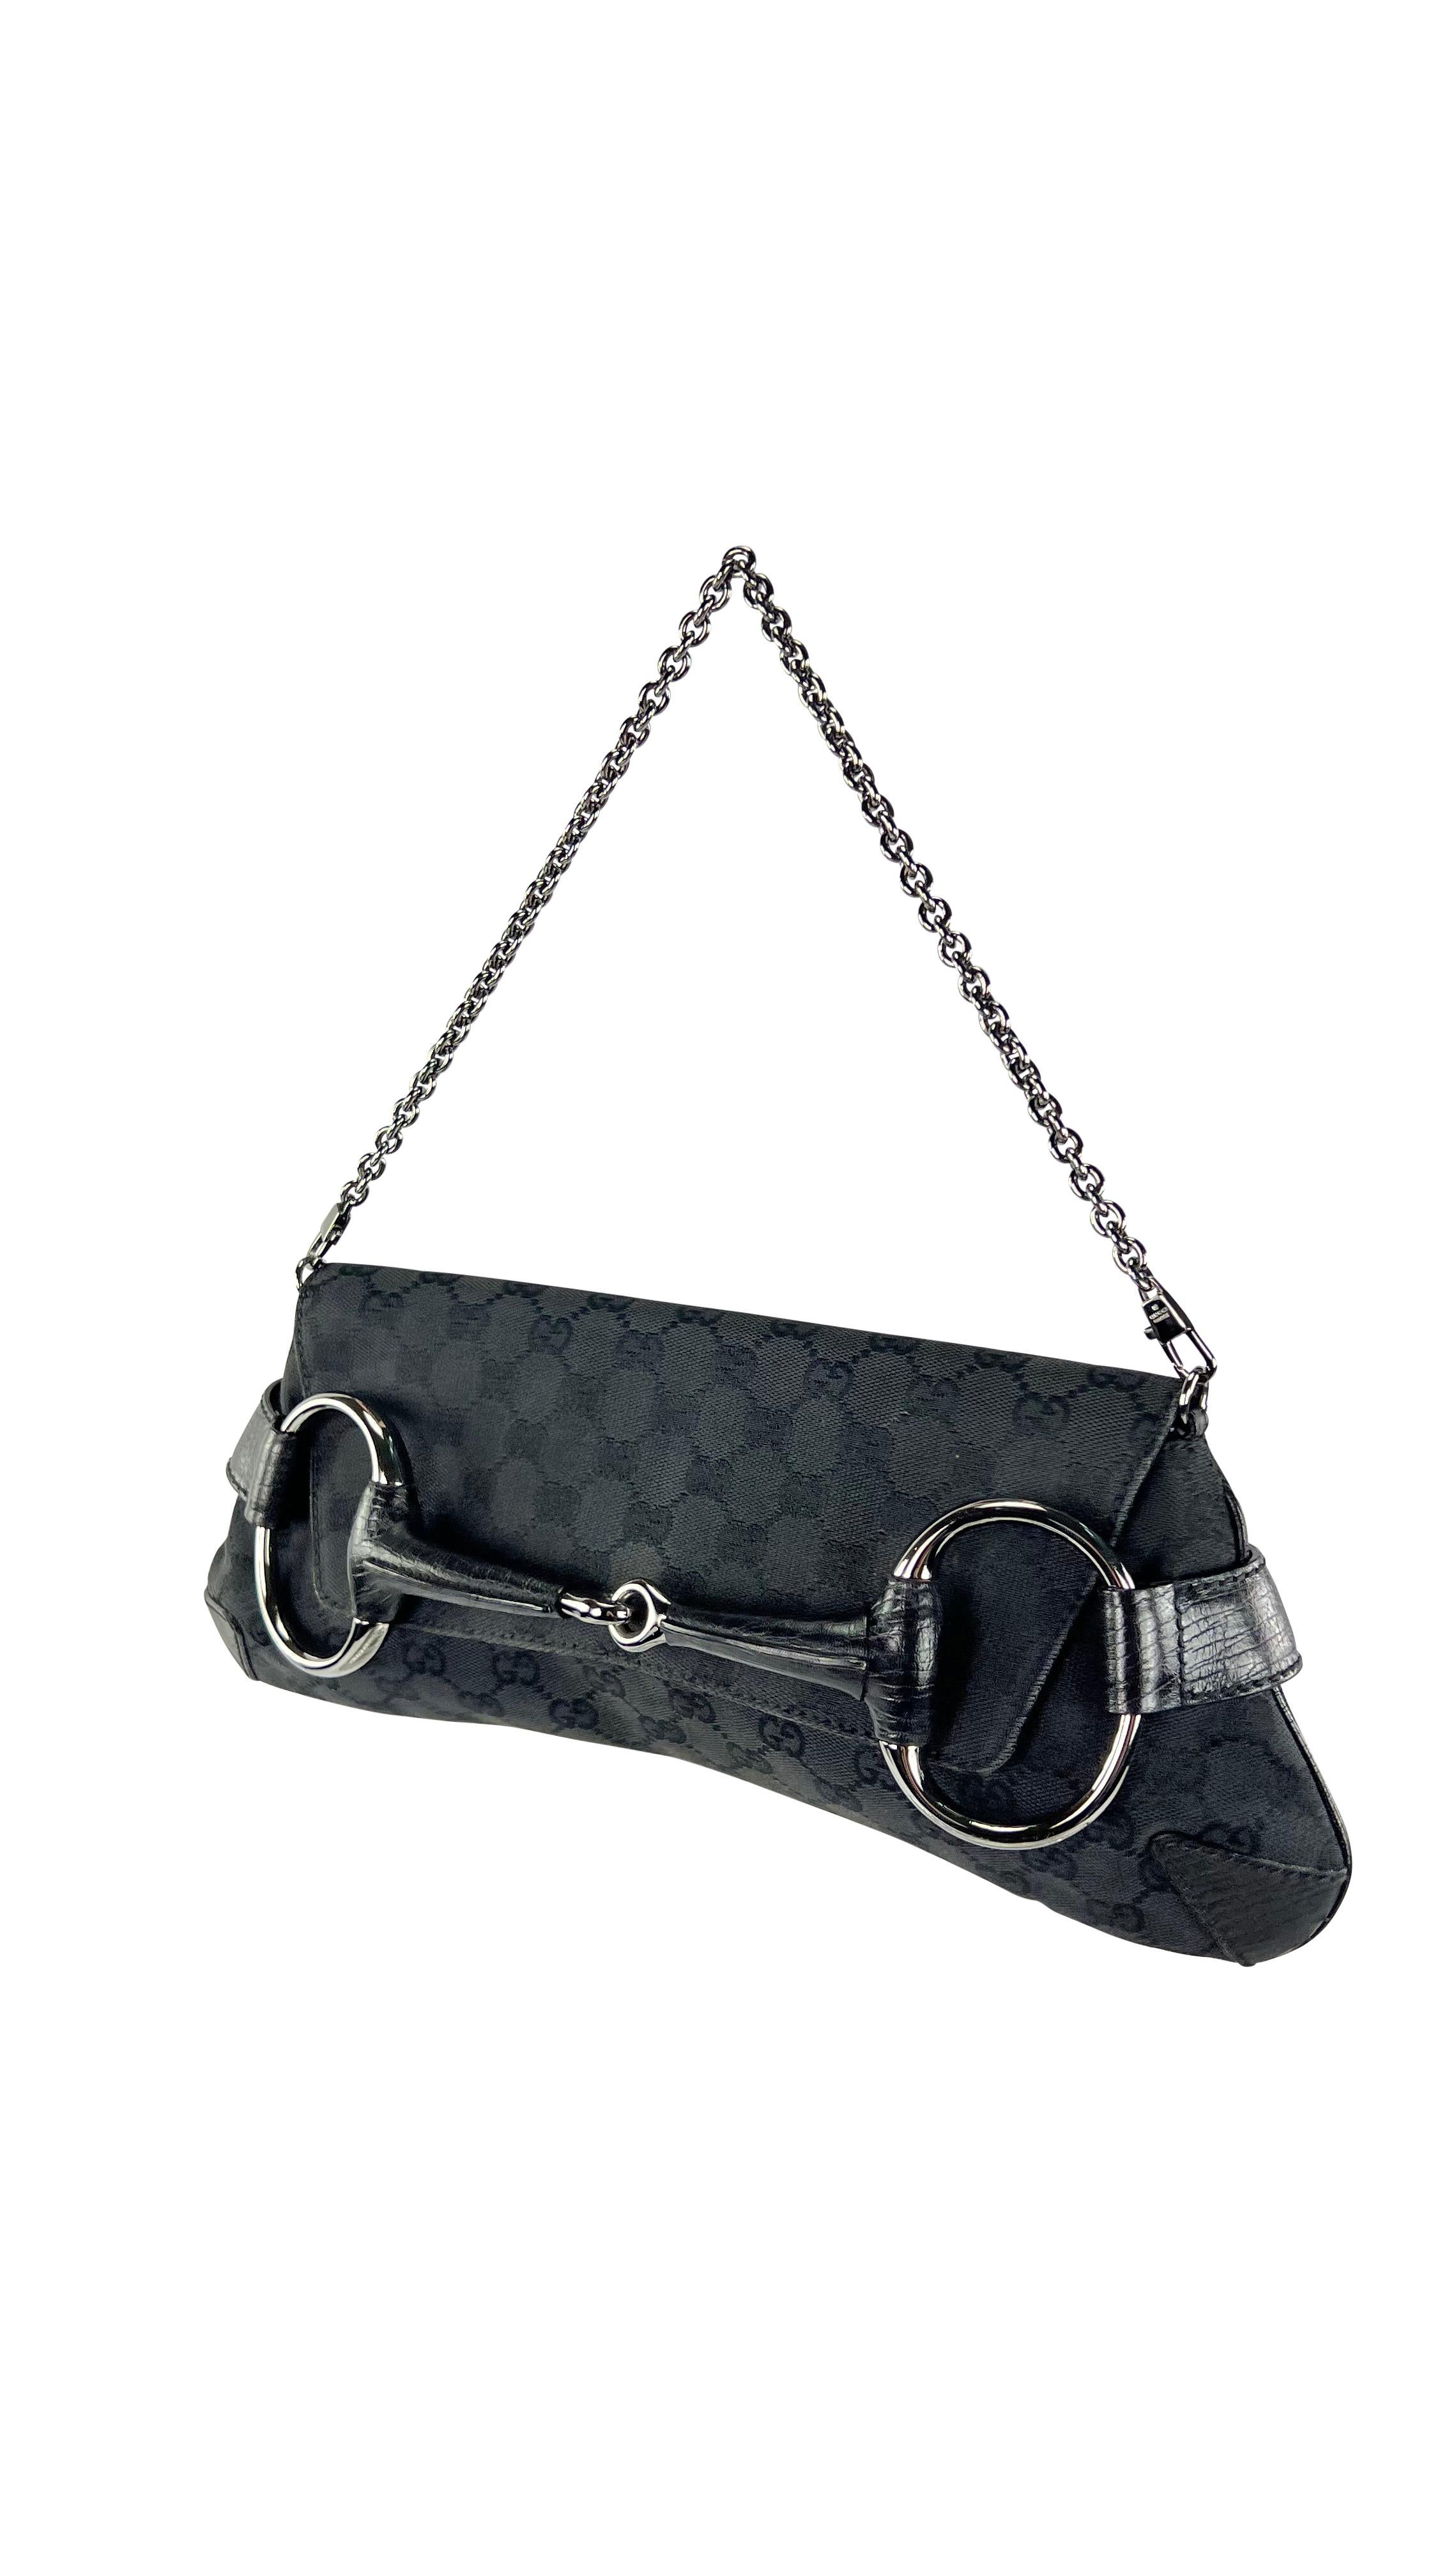 TheRealList presents: a fabulous black canvas 'GG' Gucci horse bit convertible clutch, designed by Tom Ford. From the early 2000s, the bag's horse bit-style silhouette, expertly crafted from exquisite leather, is adorned with a flap, silver chain,